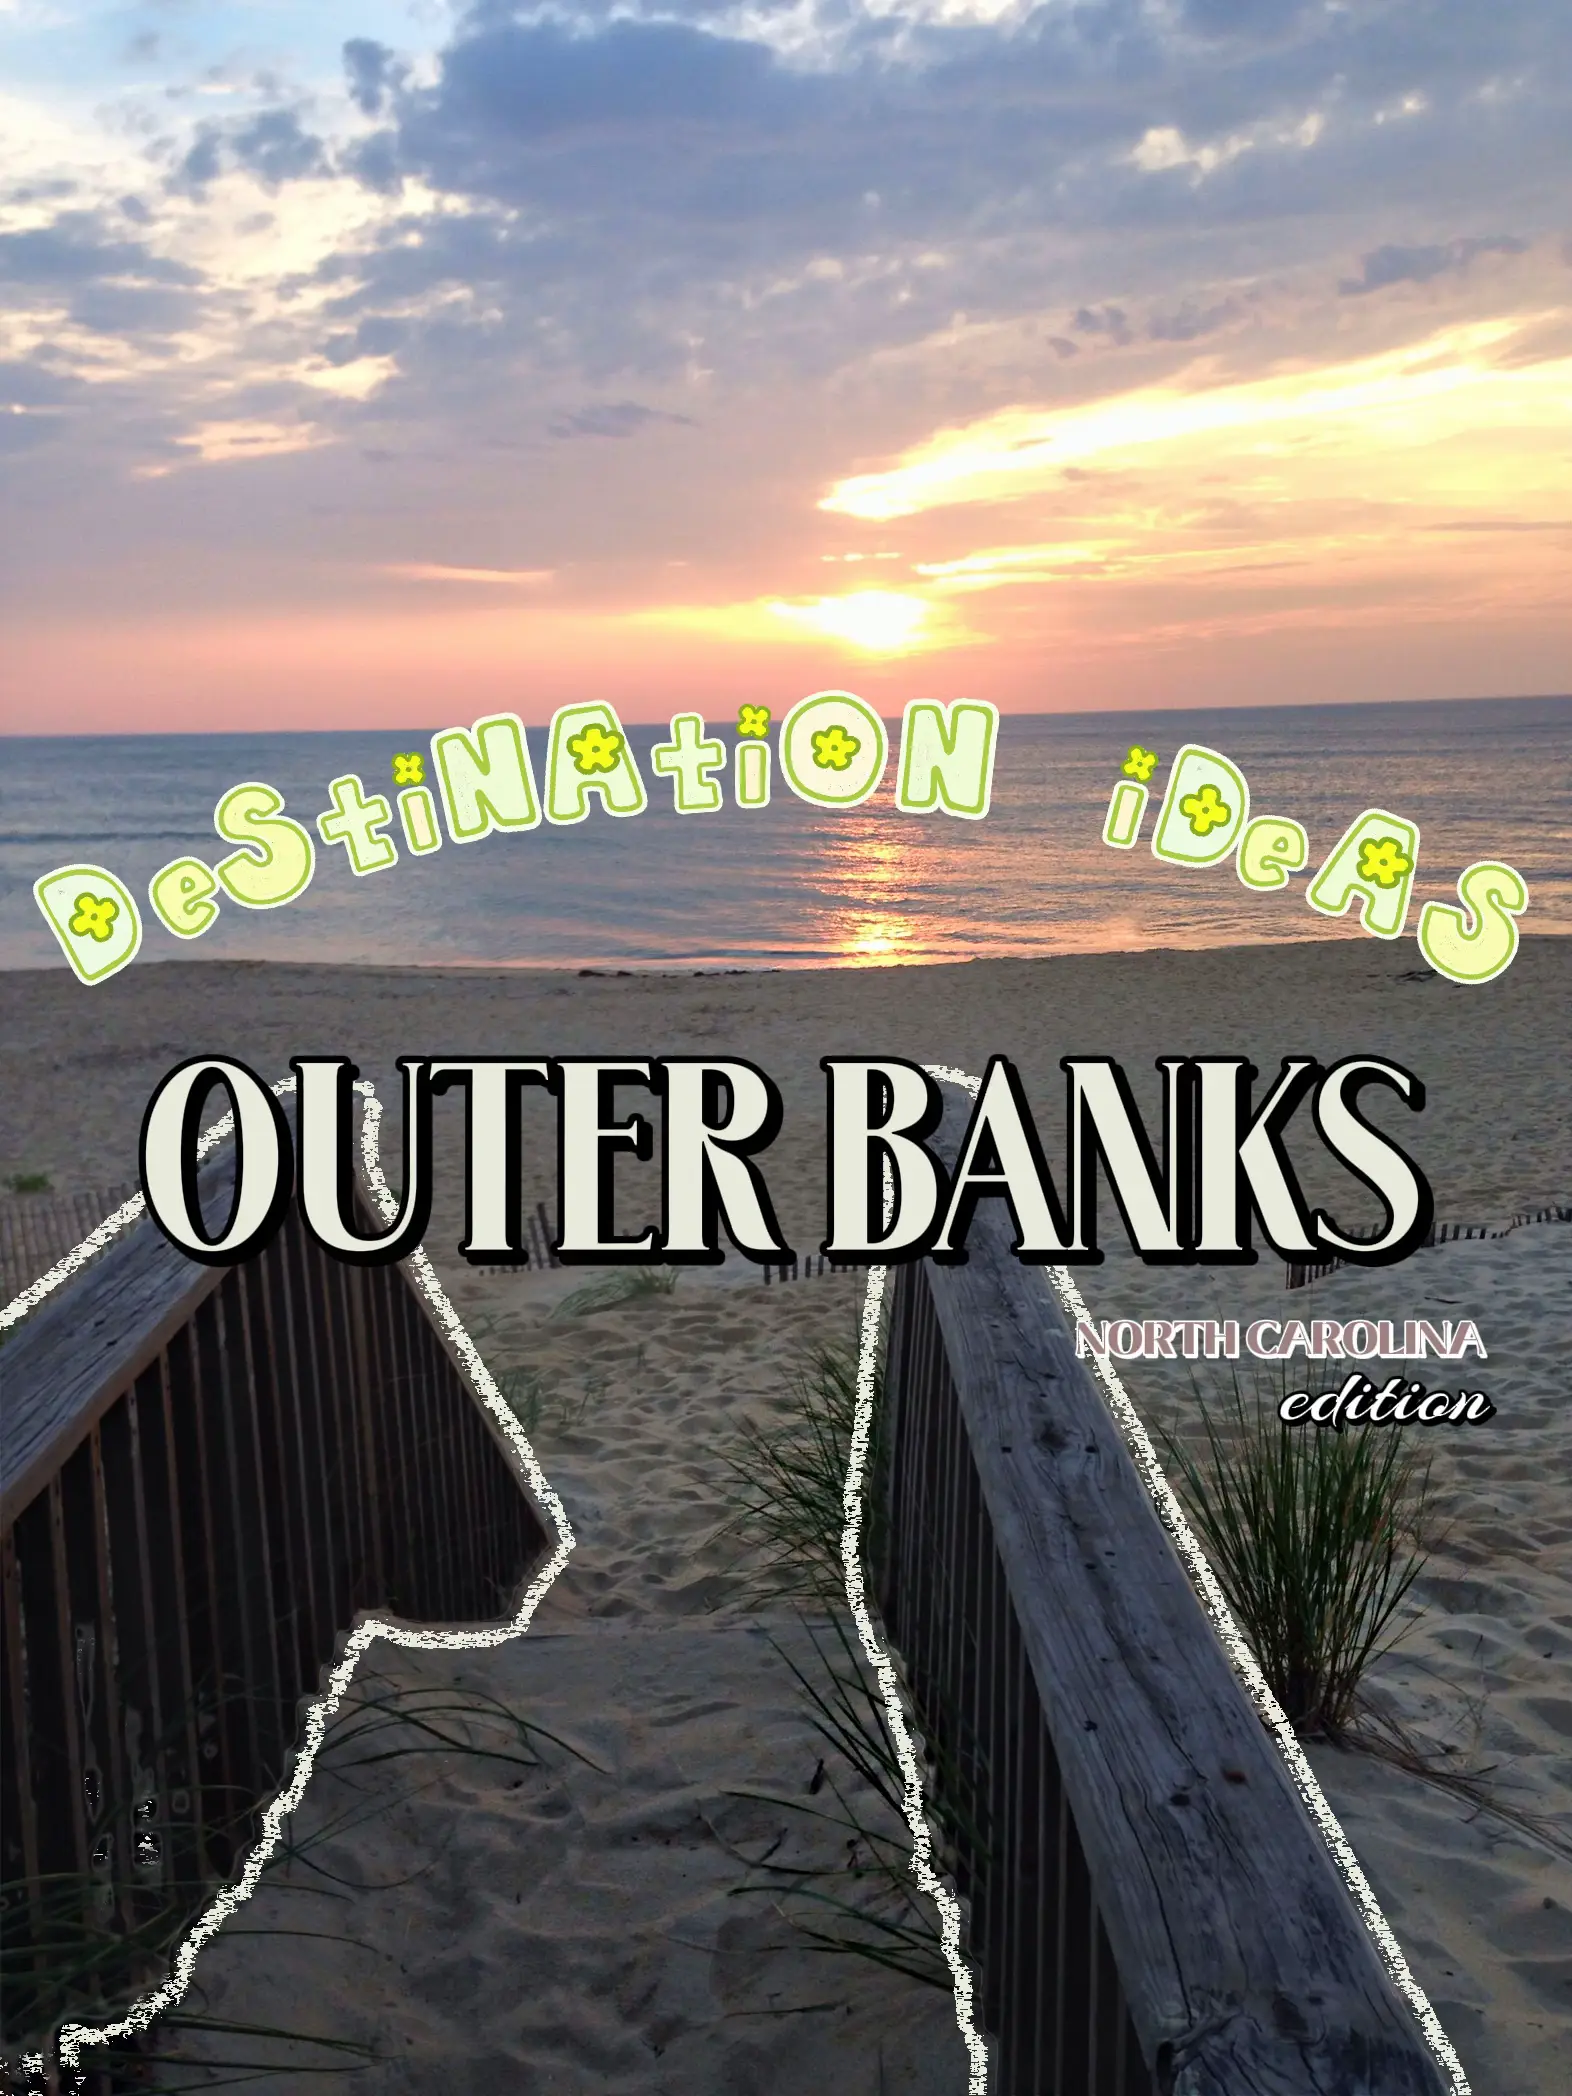 OUTER BANKS's images